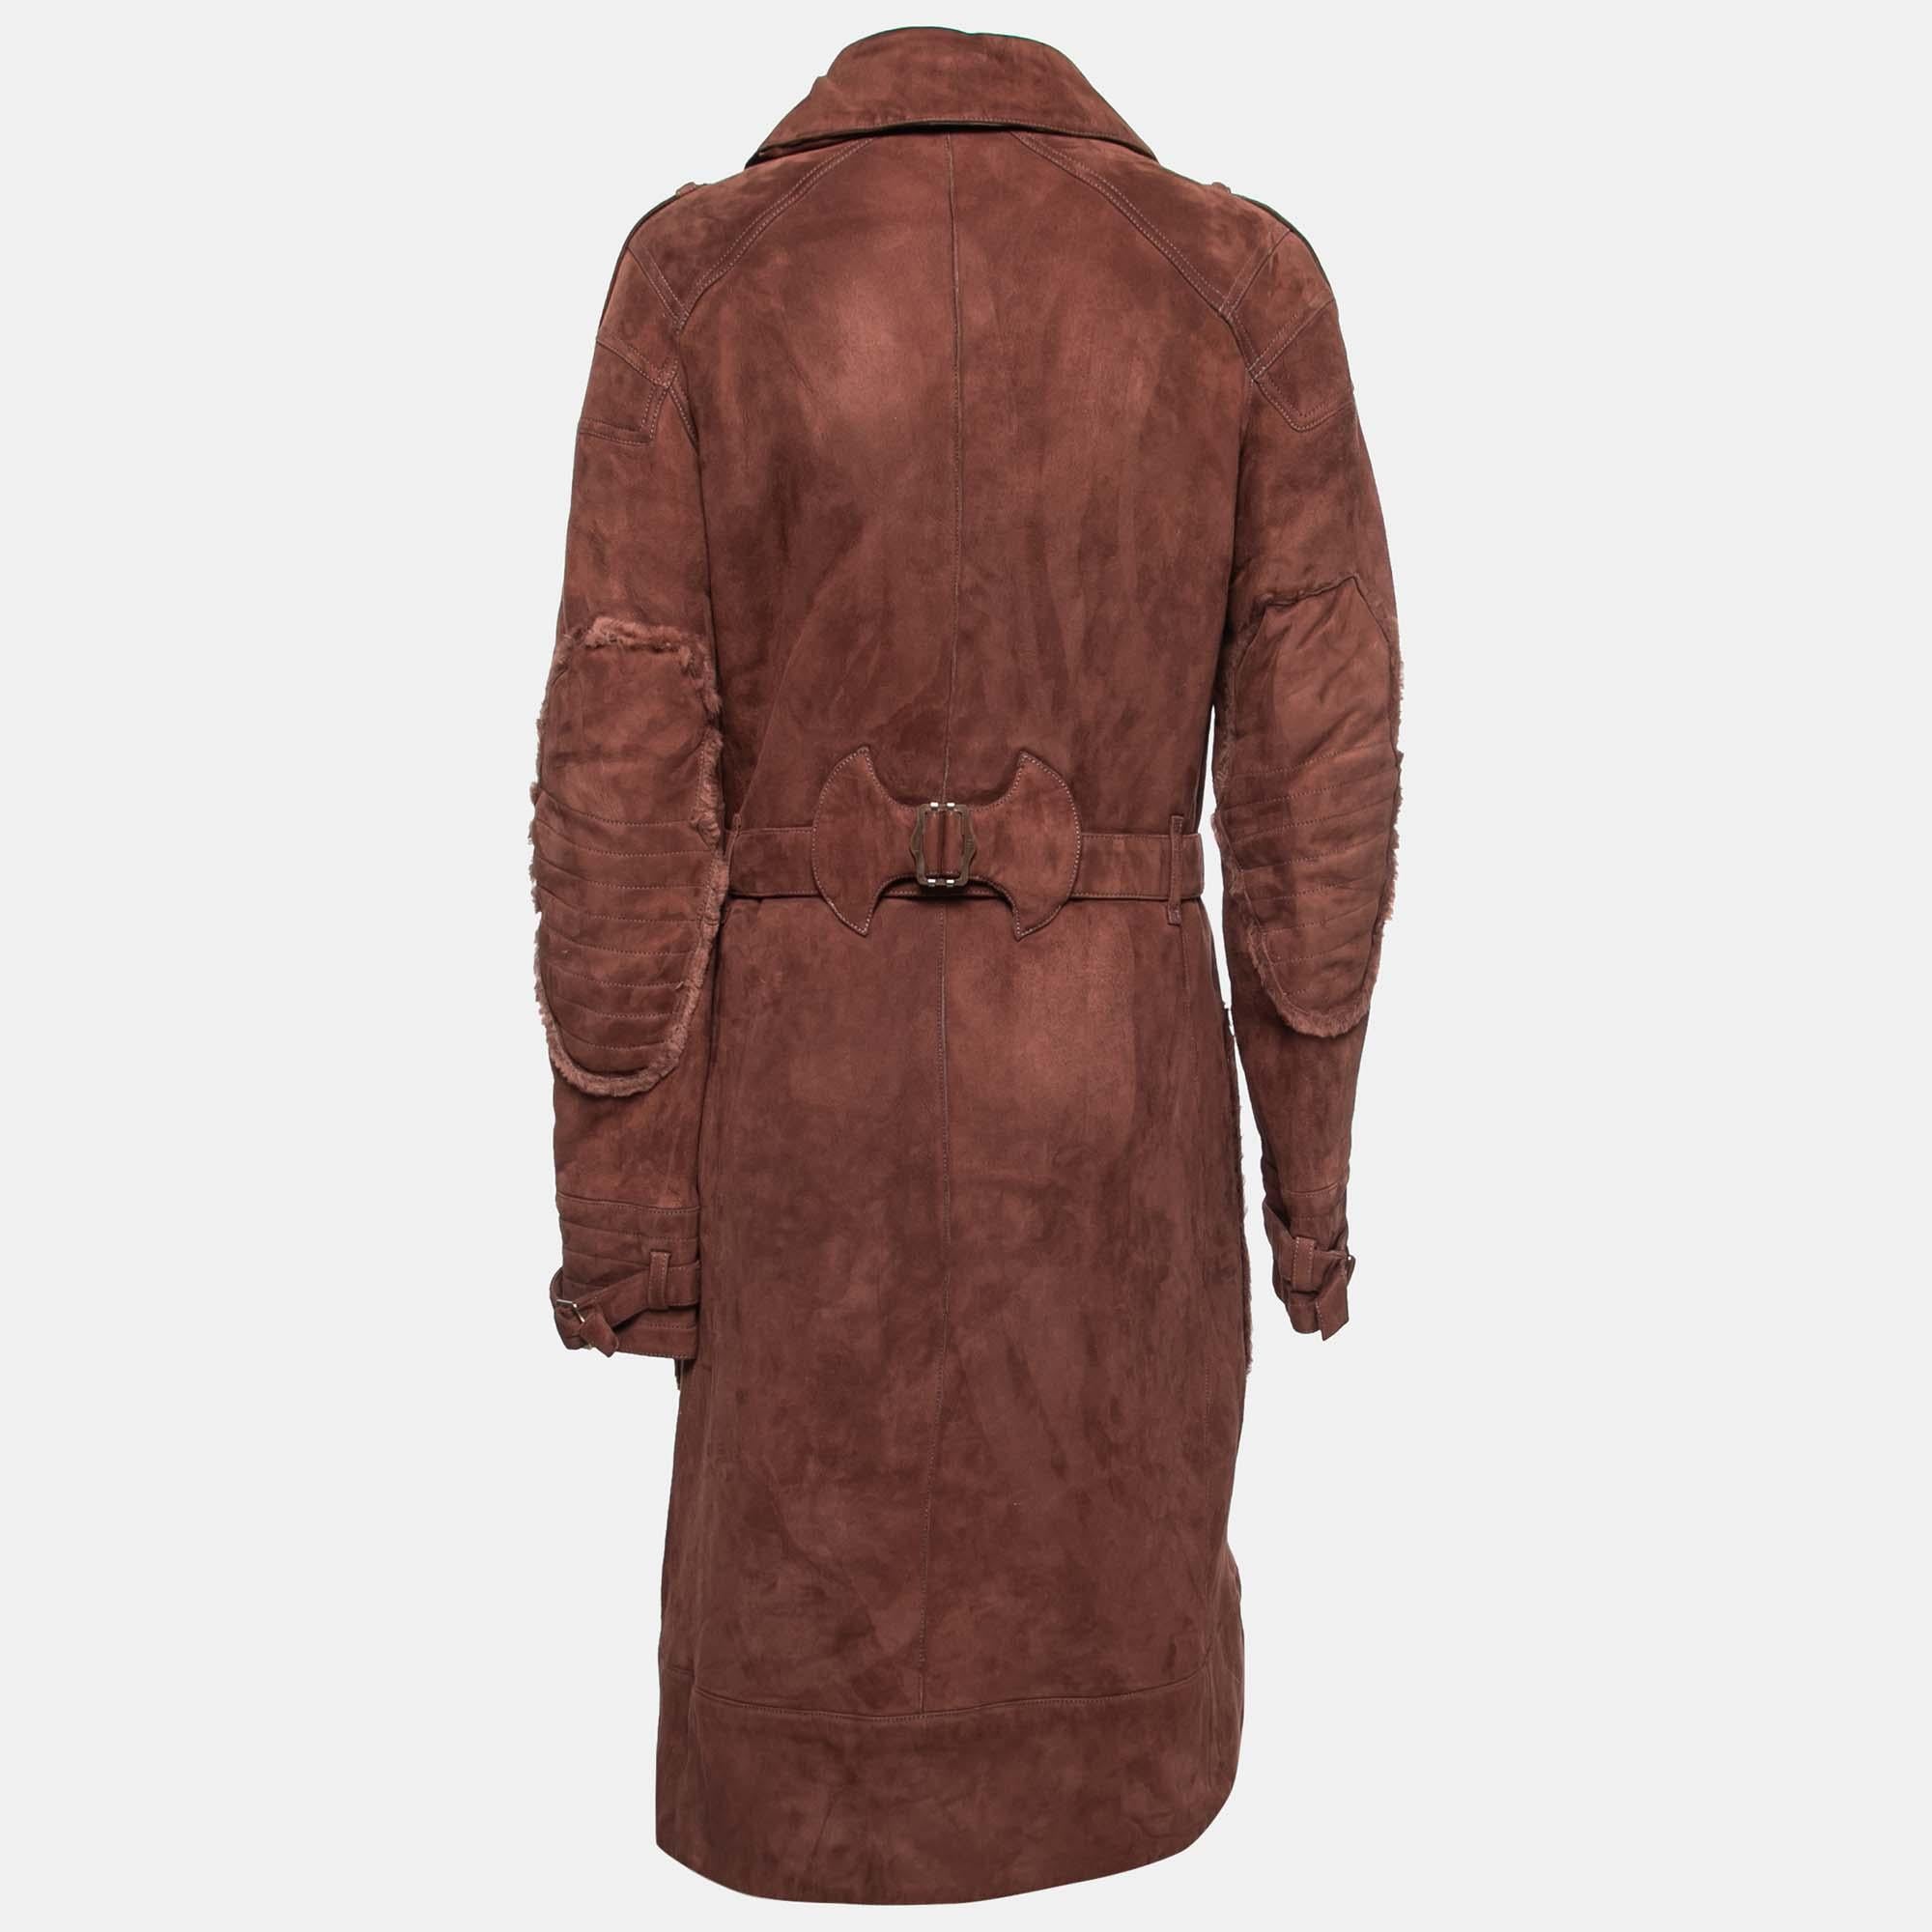 This coat brings you both class and luxury as you wear it. It is highlighted with long sleeves and classic details, thus granting a polished, formal finish.

